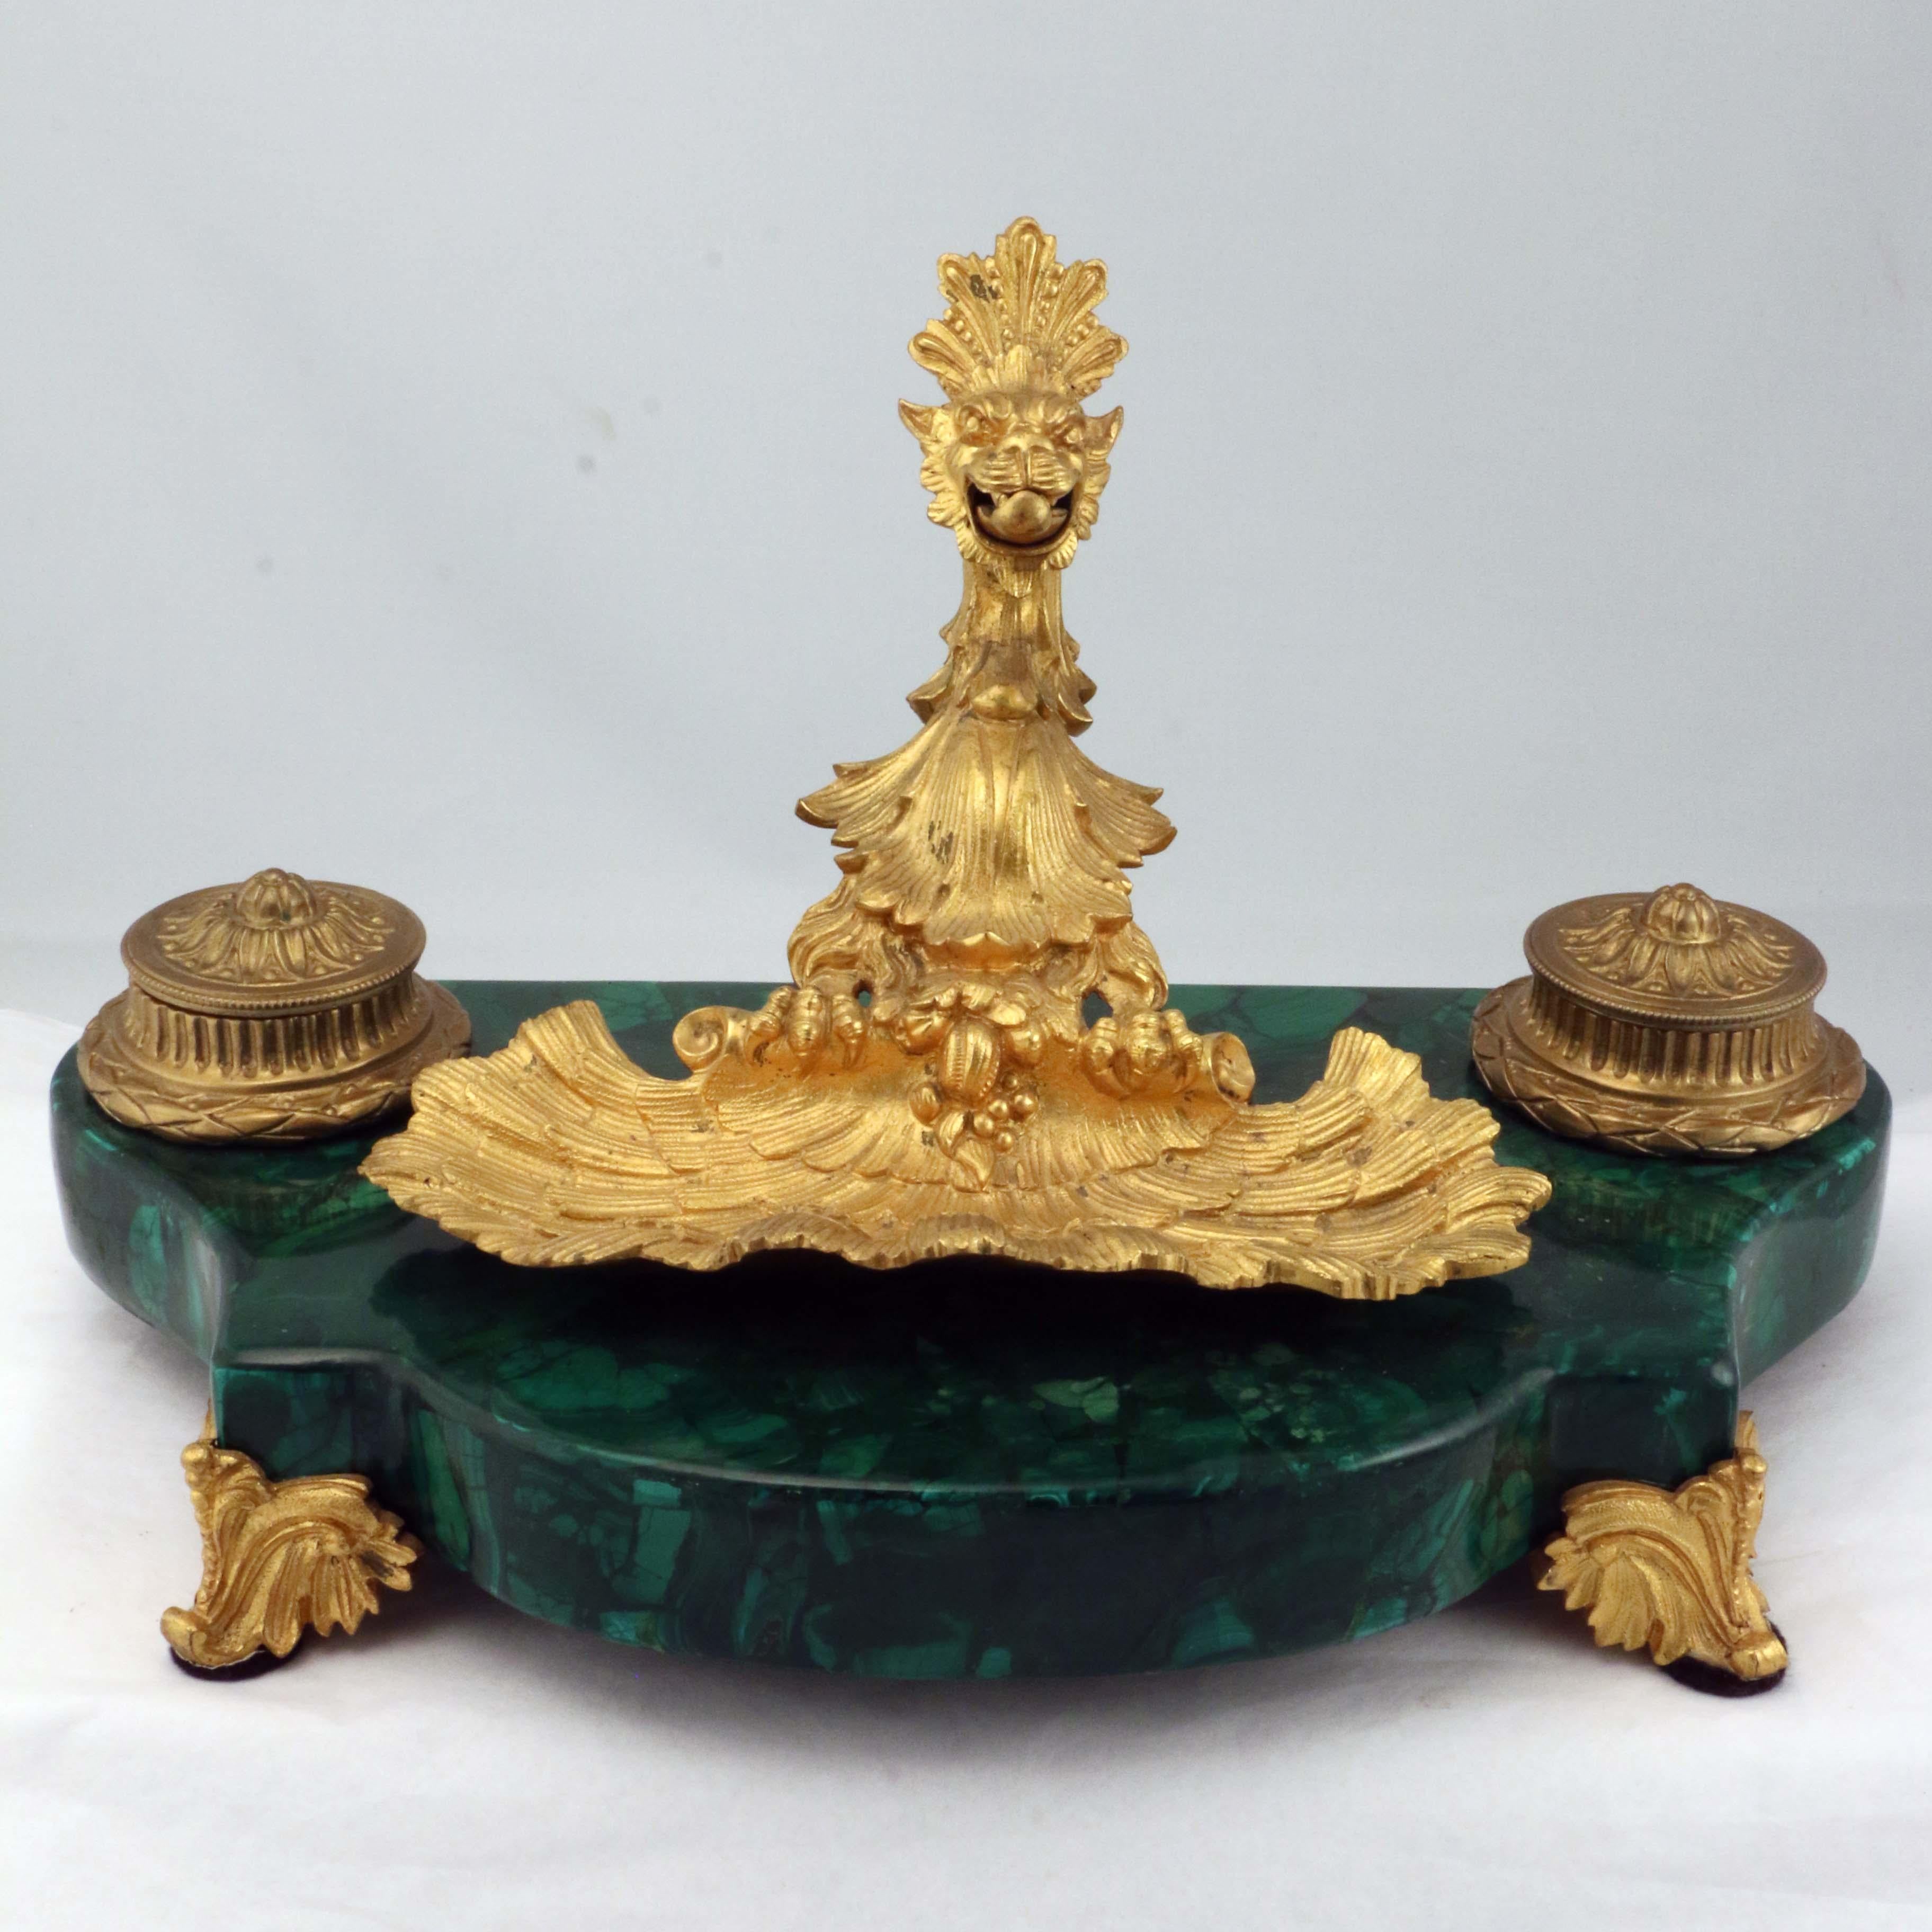 This luxurious encrier de bureau is raised on scrolling and leafy feet mounting a malachite-finished base. The tray itself is modelled as a shell rising to a spring-loaded pen holder. The animal grips the pen between its teeth. The flanking covered